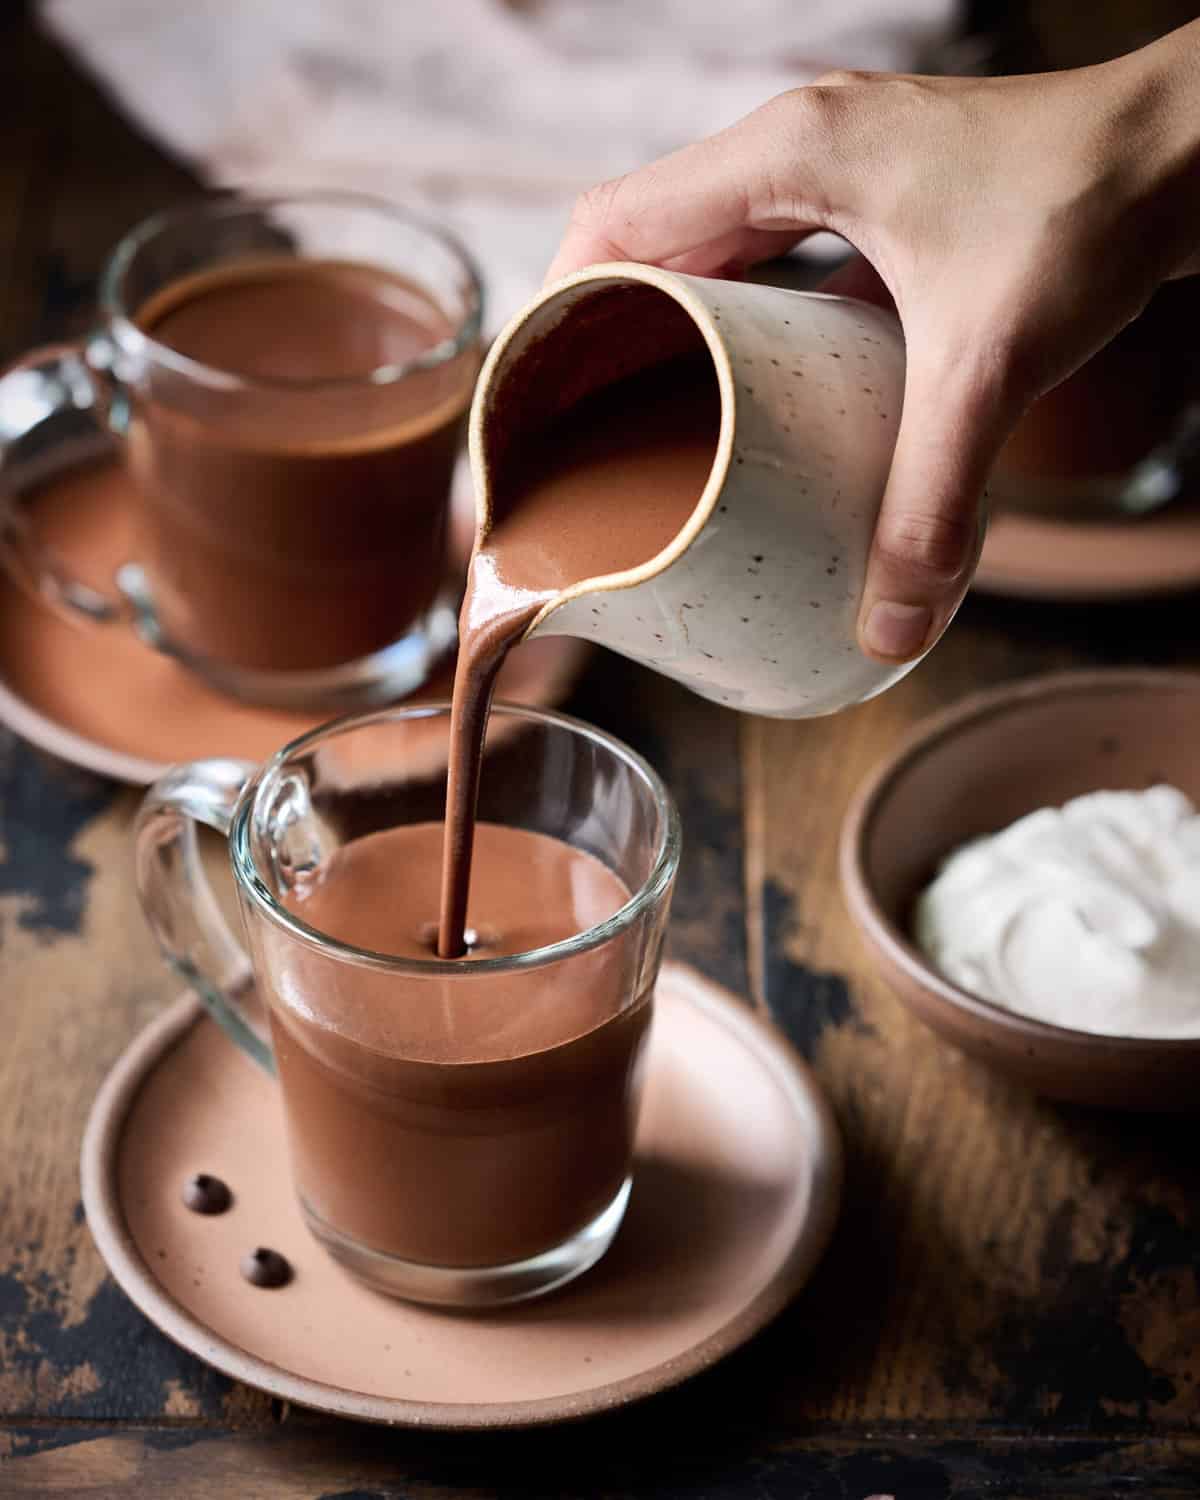 Person pouring hot chocolate into glass mug on wood table.